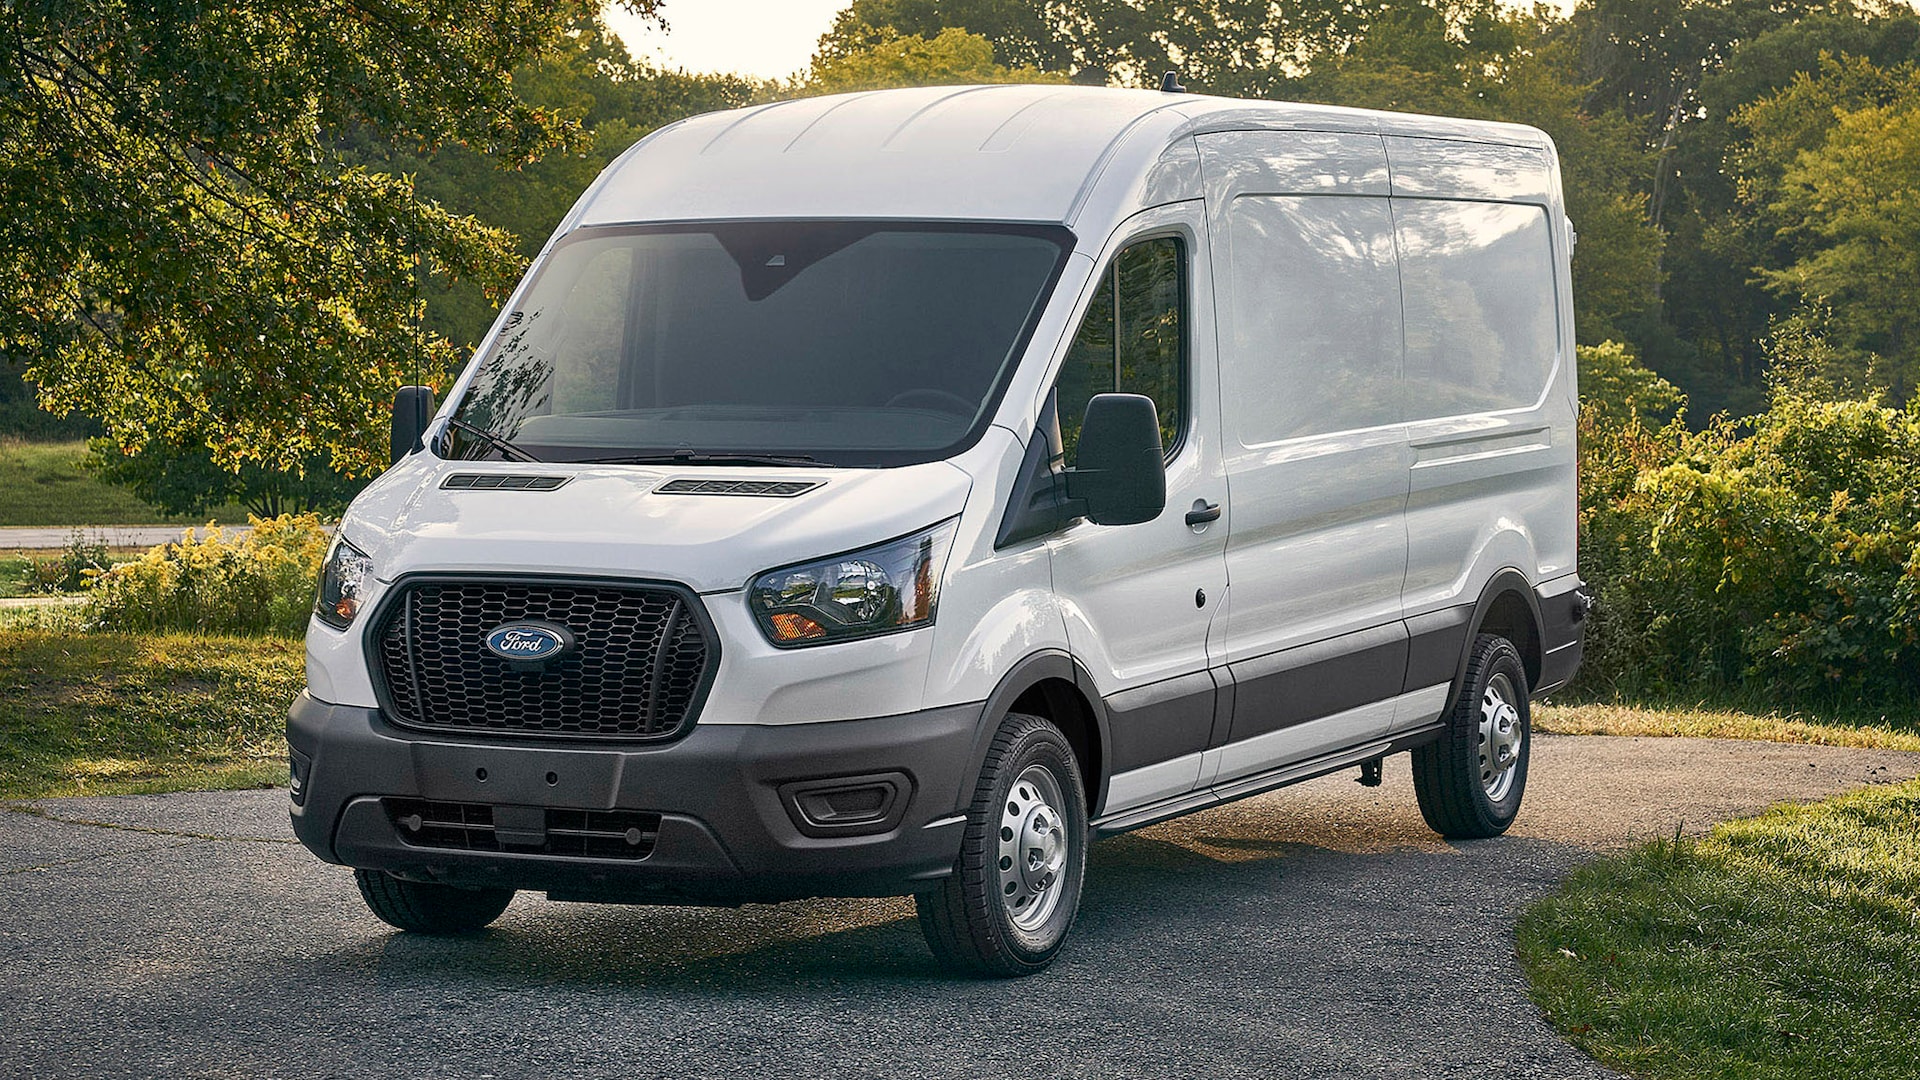 2022 Ford Transit Prices, Reviews, and Photos - MotorTrend